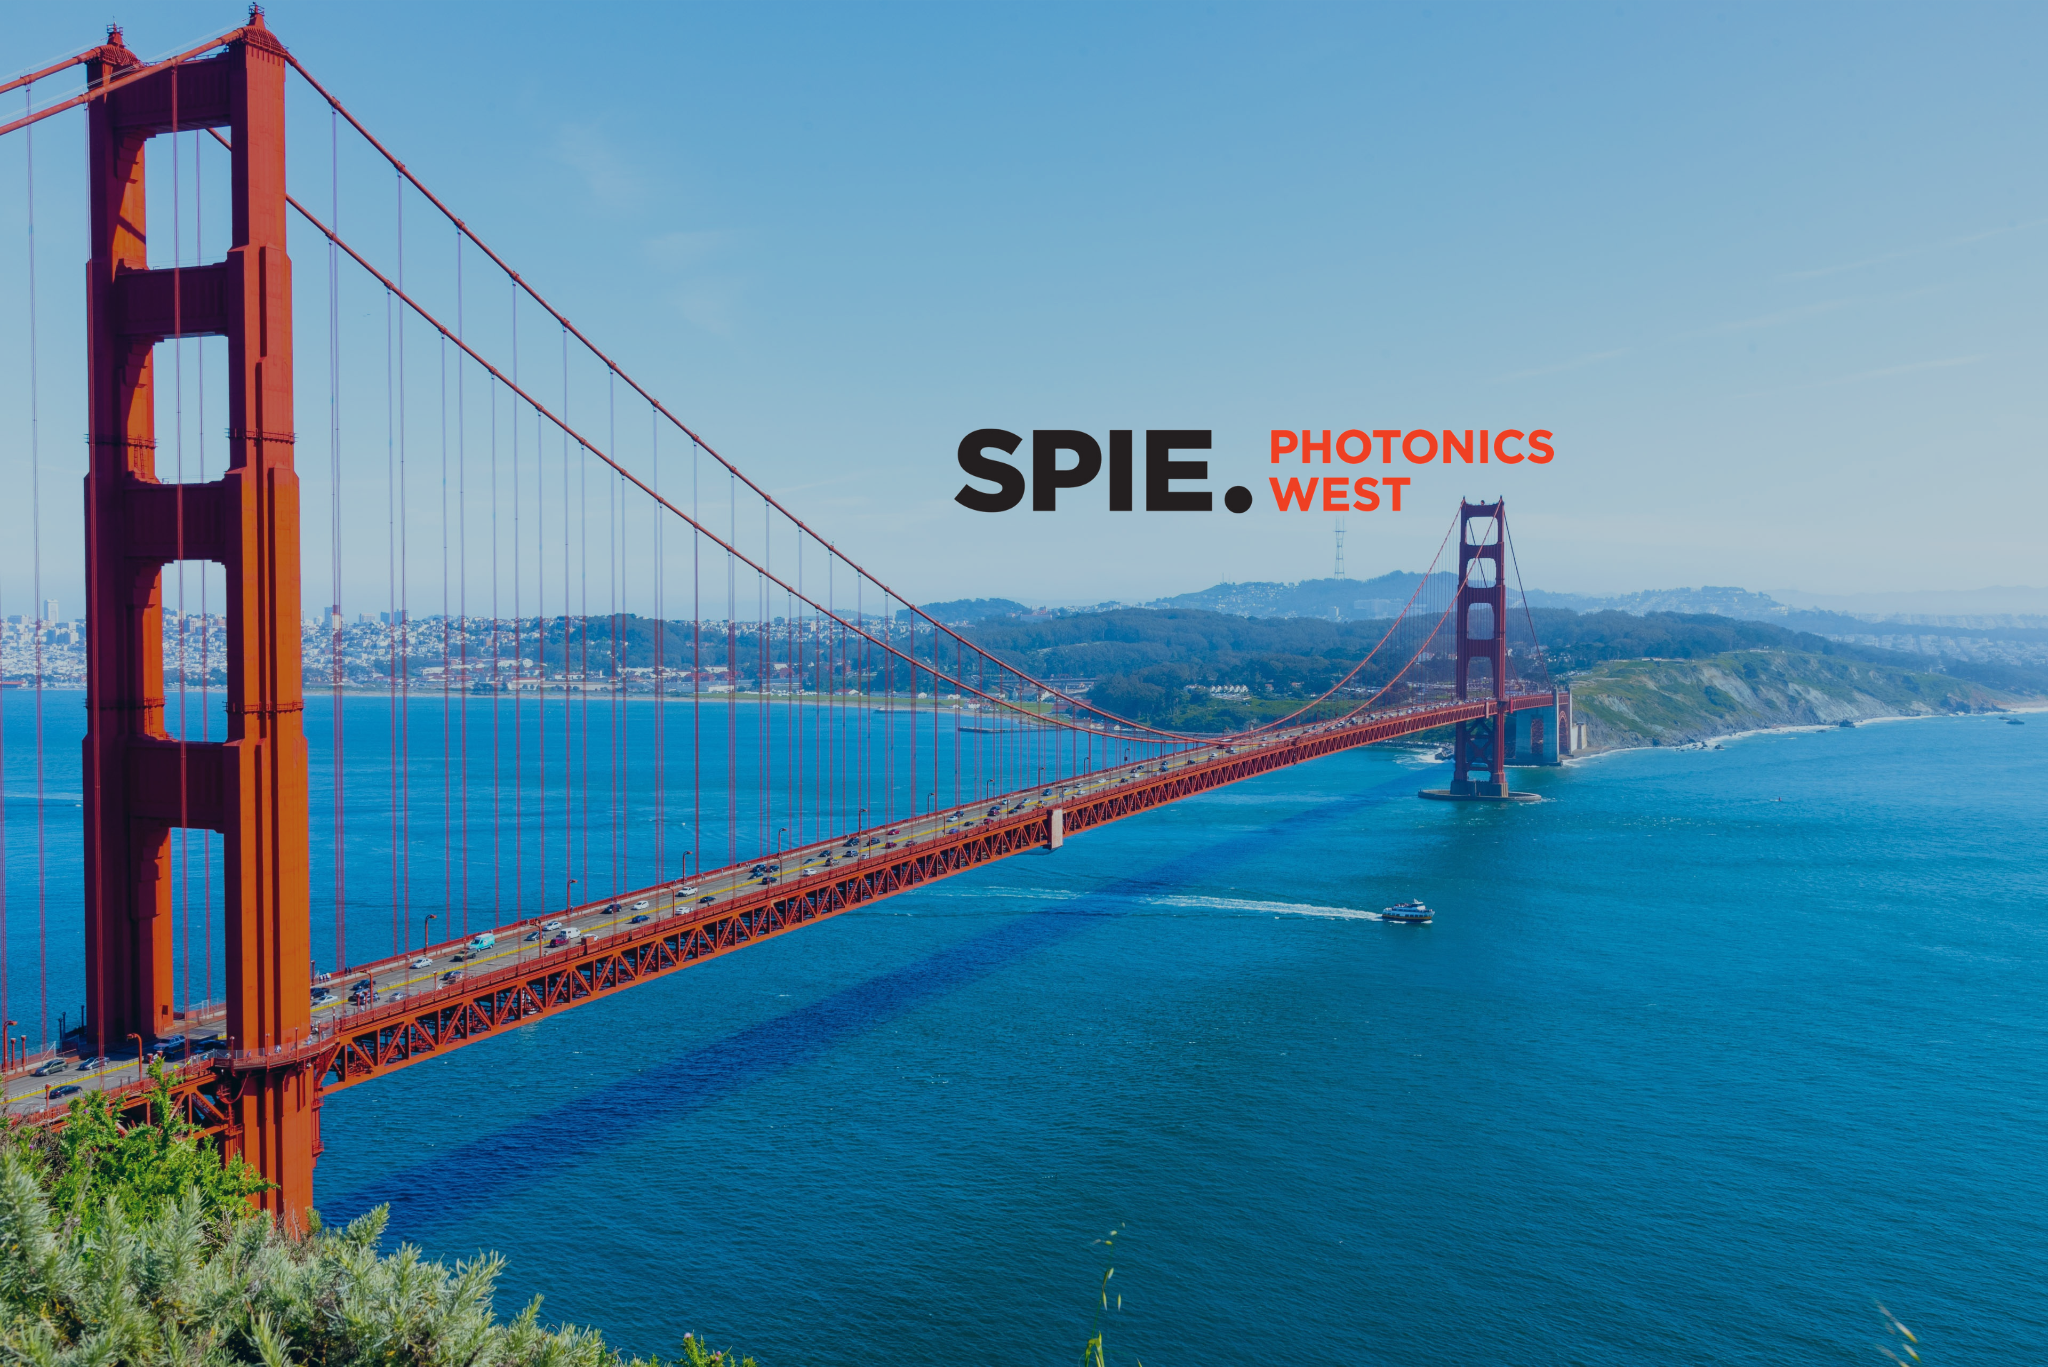 A banner image of the Golden Gate Bridge in San Francisco with the SPIE Photonics West logo on the image.